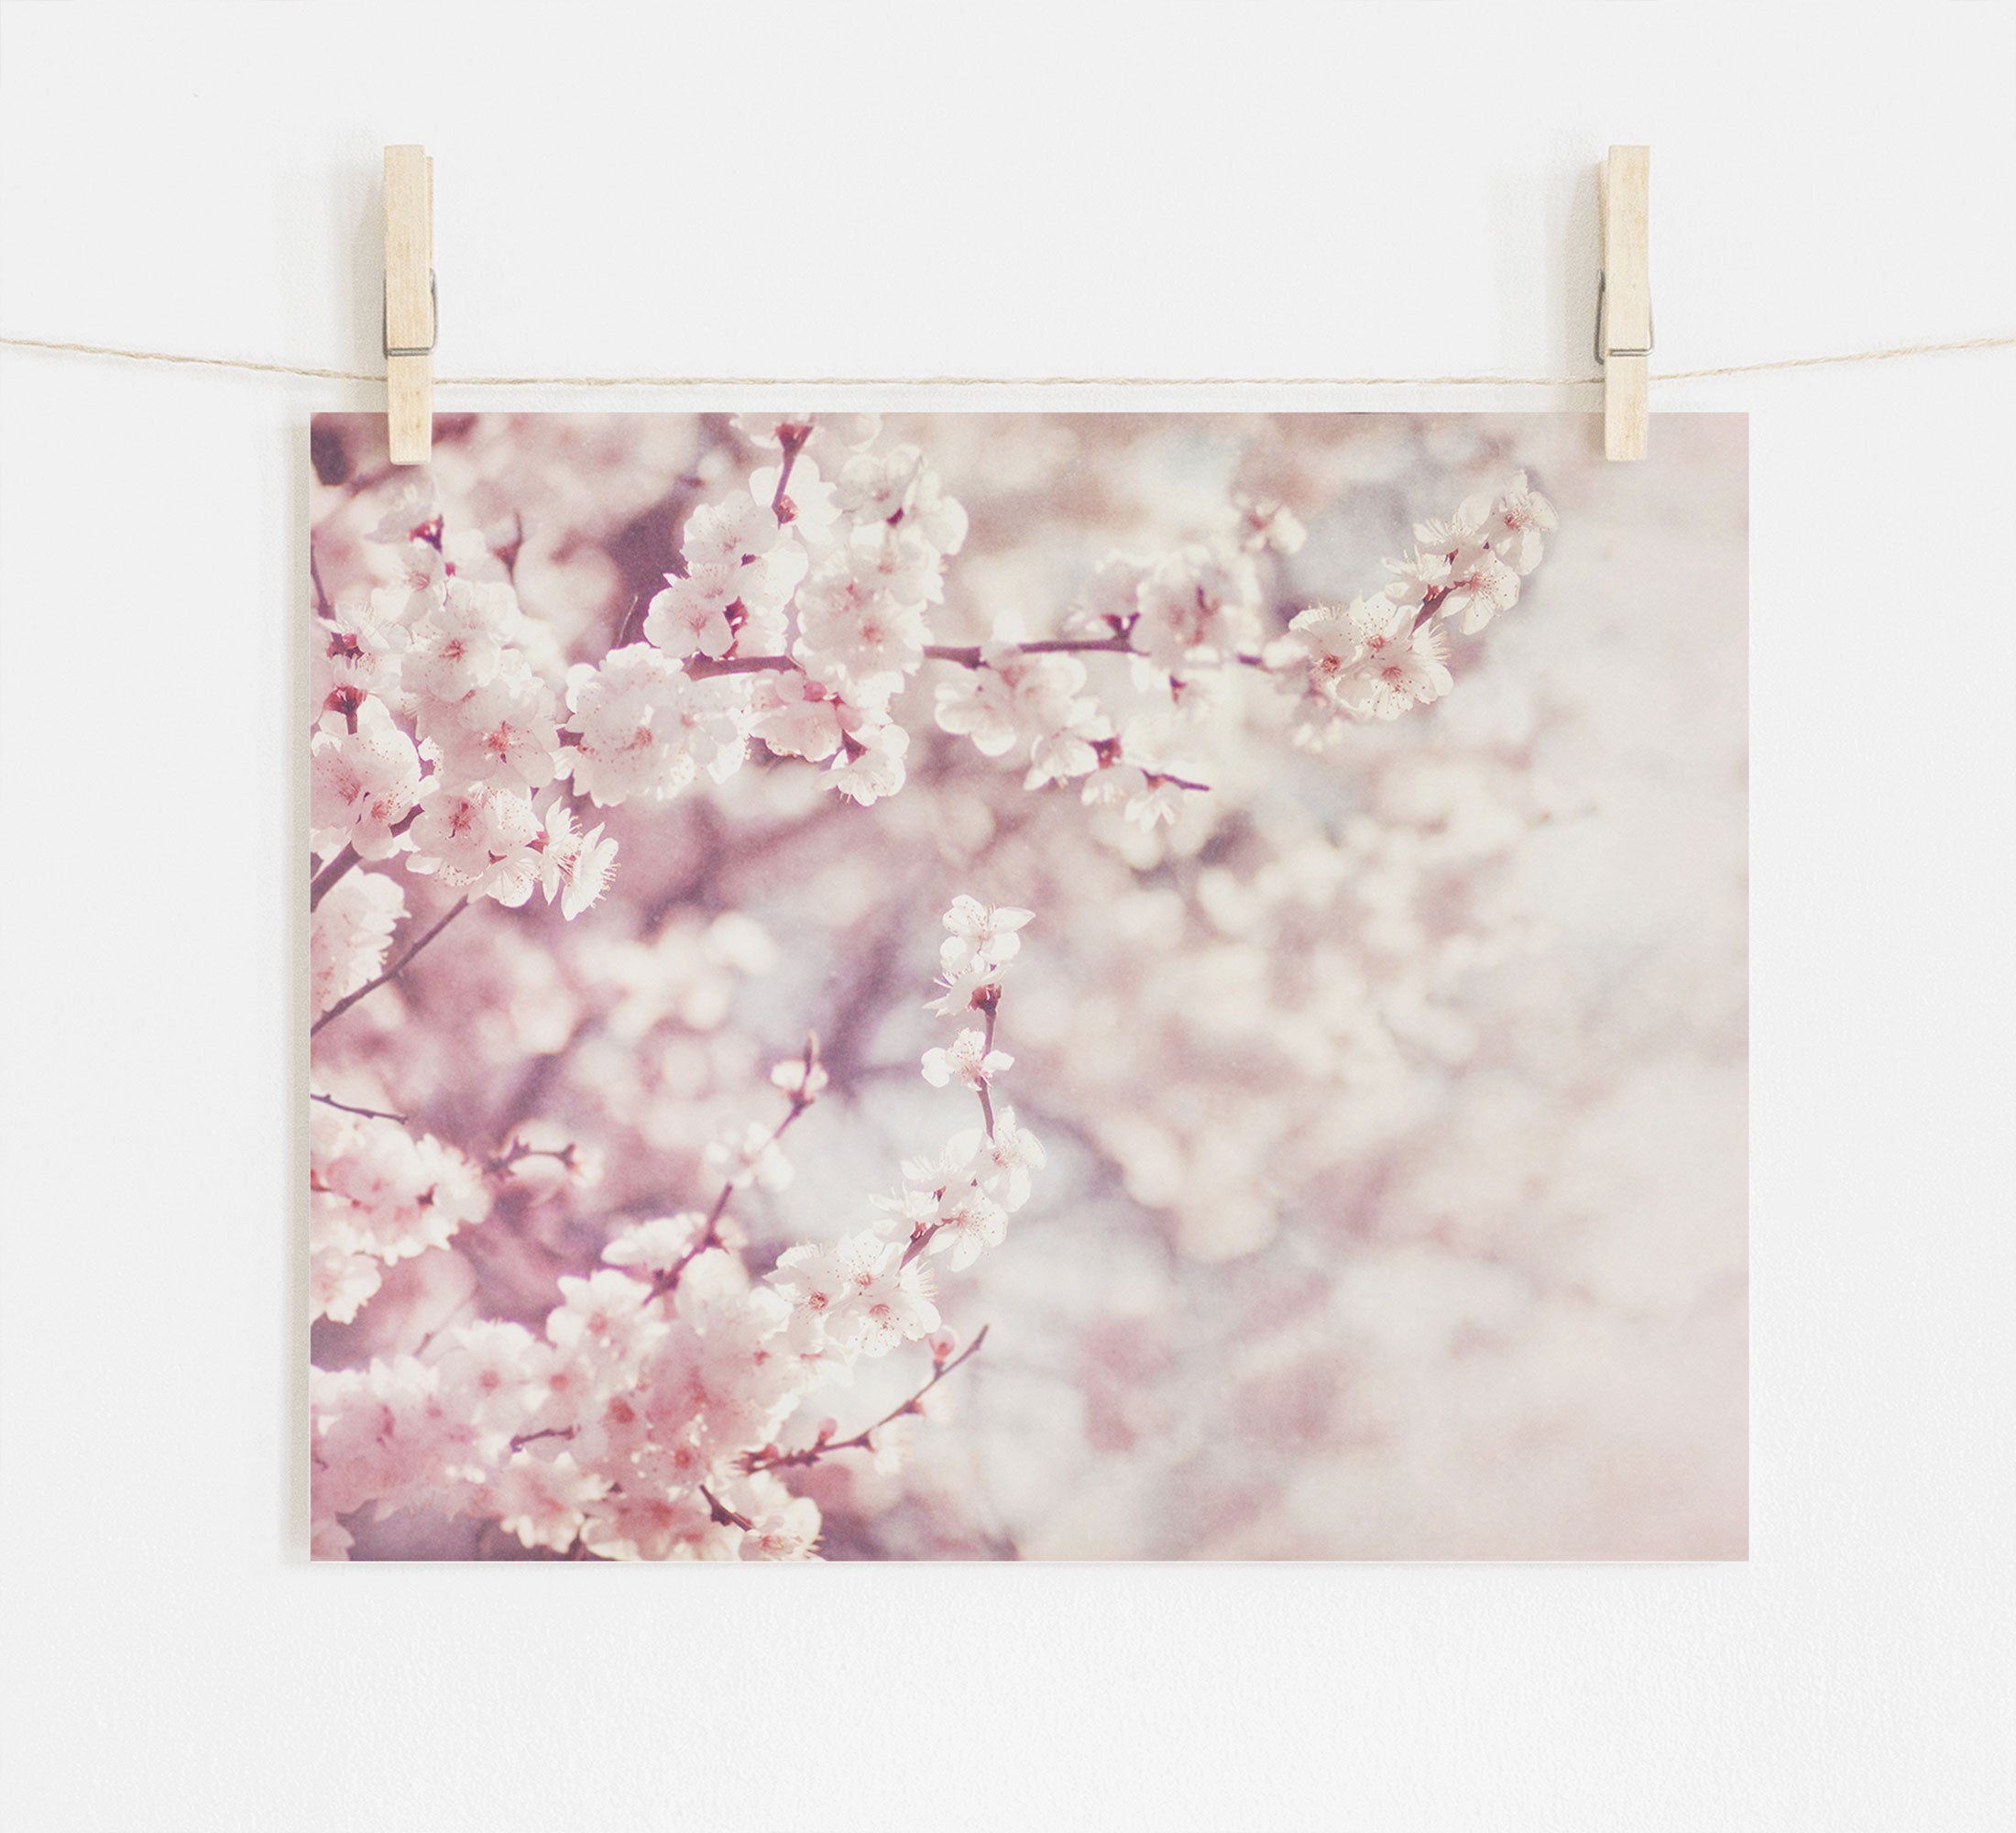 A photo of the Pink Floral Print, &#39;Dreamy Blossom&#39; from Offley Green, clipped to a string with wooden clothespins, displayed against a white wall. The blossoms are in soft focus with a shabby pink and white color palette.